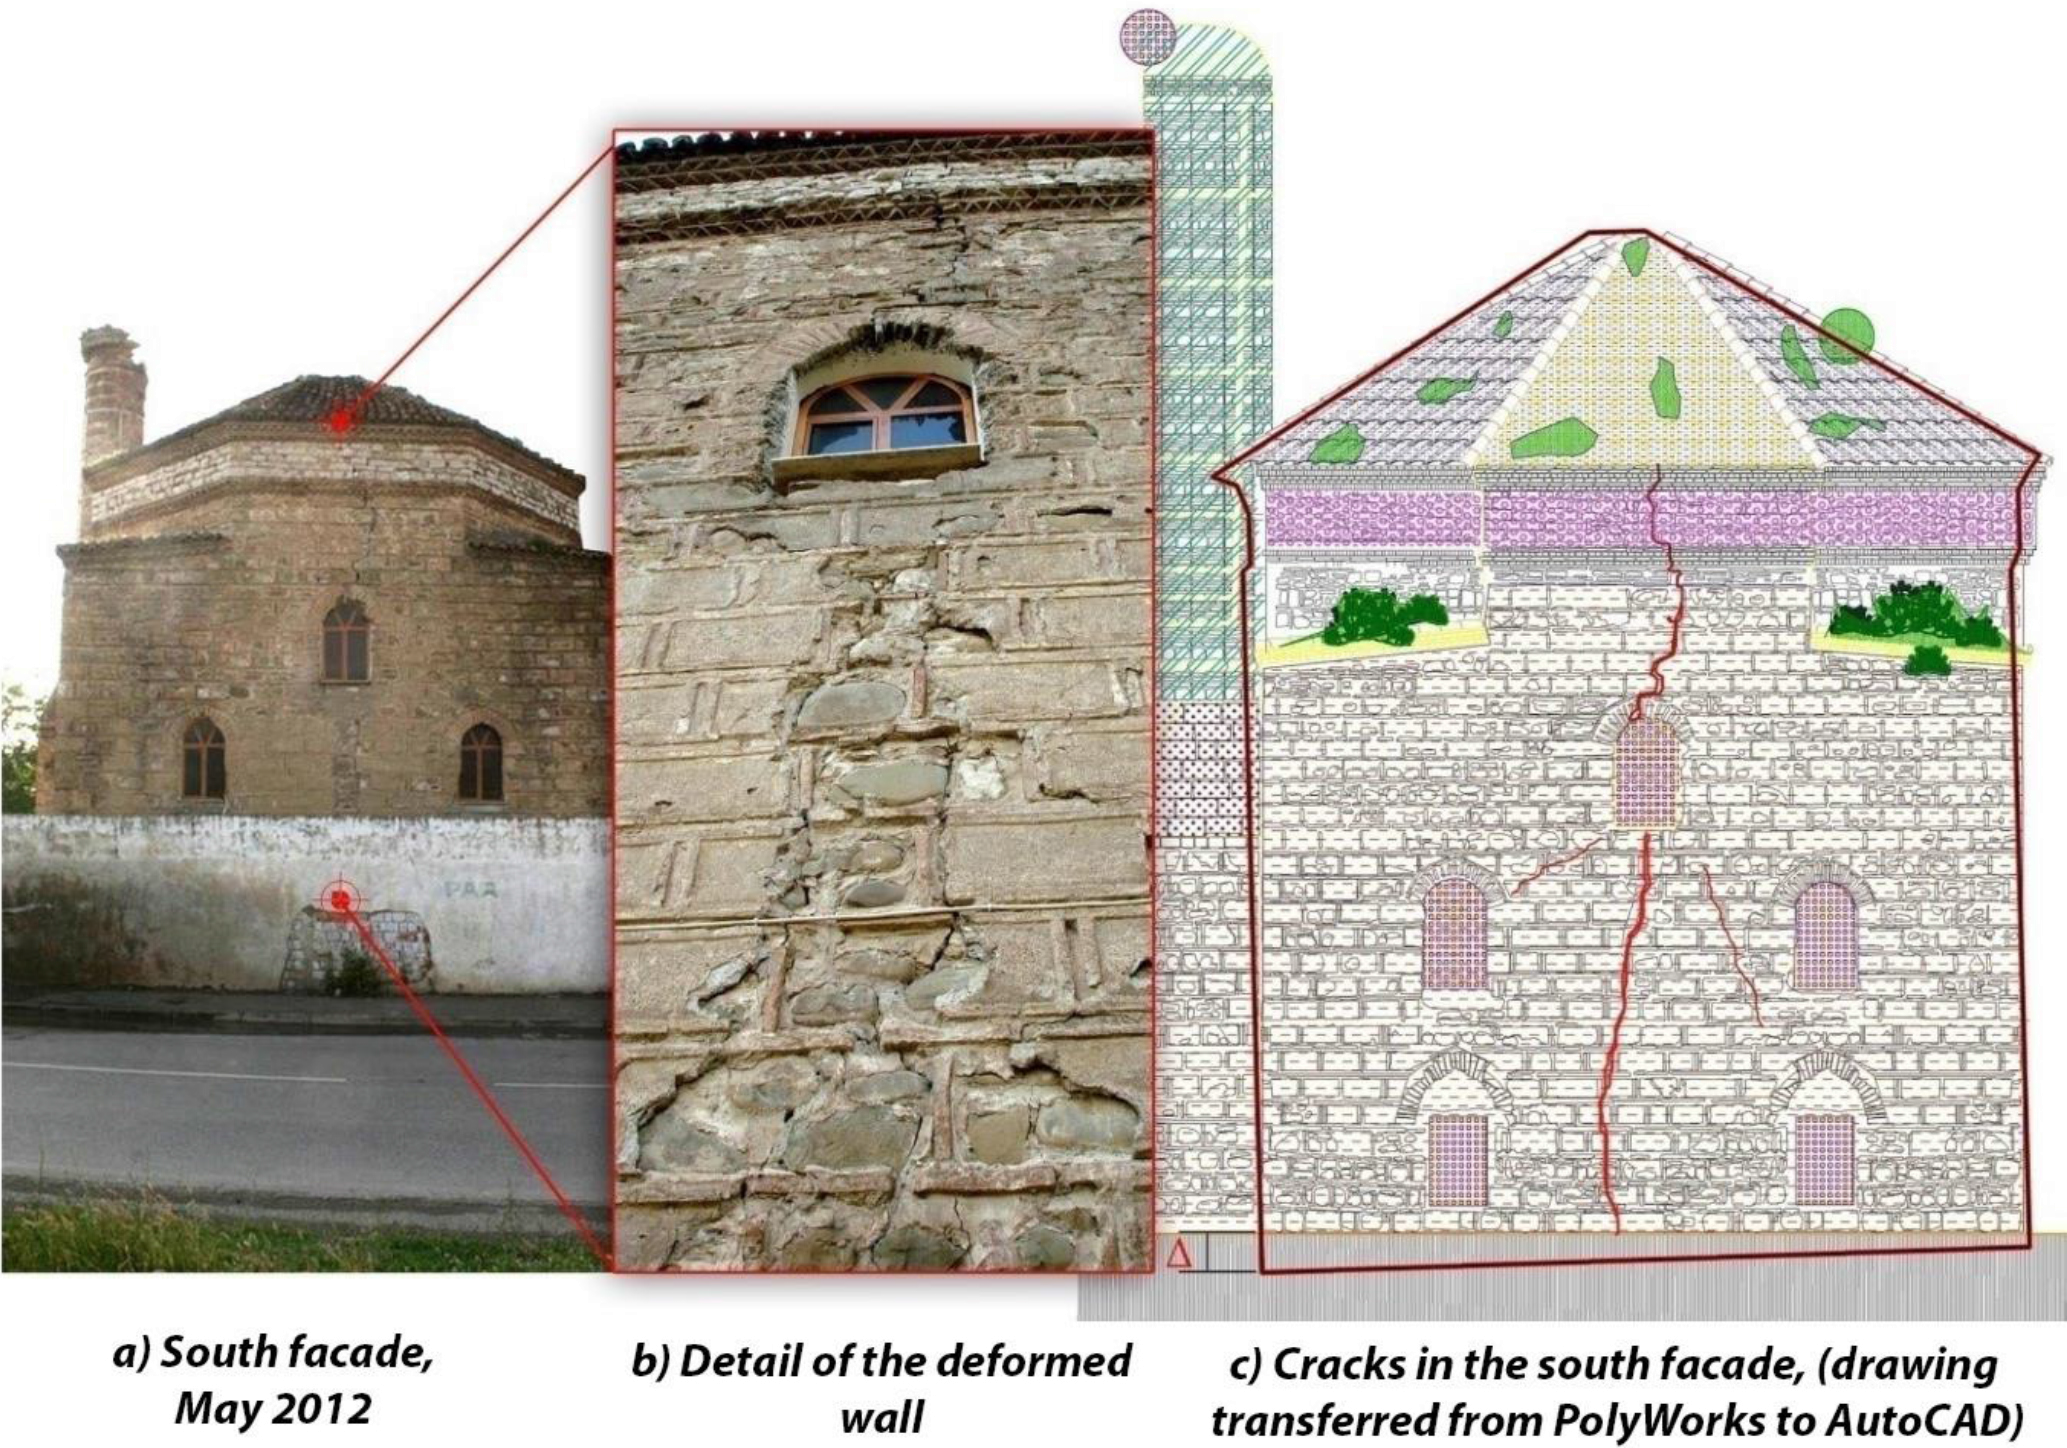 Cracks due to differential settlement (d = 18 cm) in the south façade (May 2012).